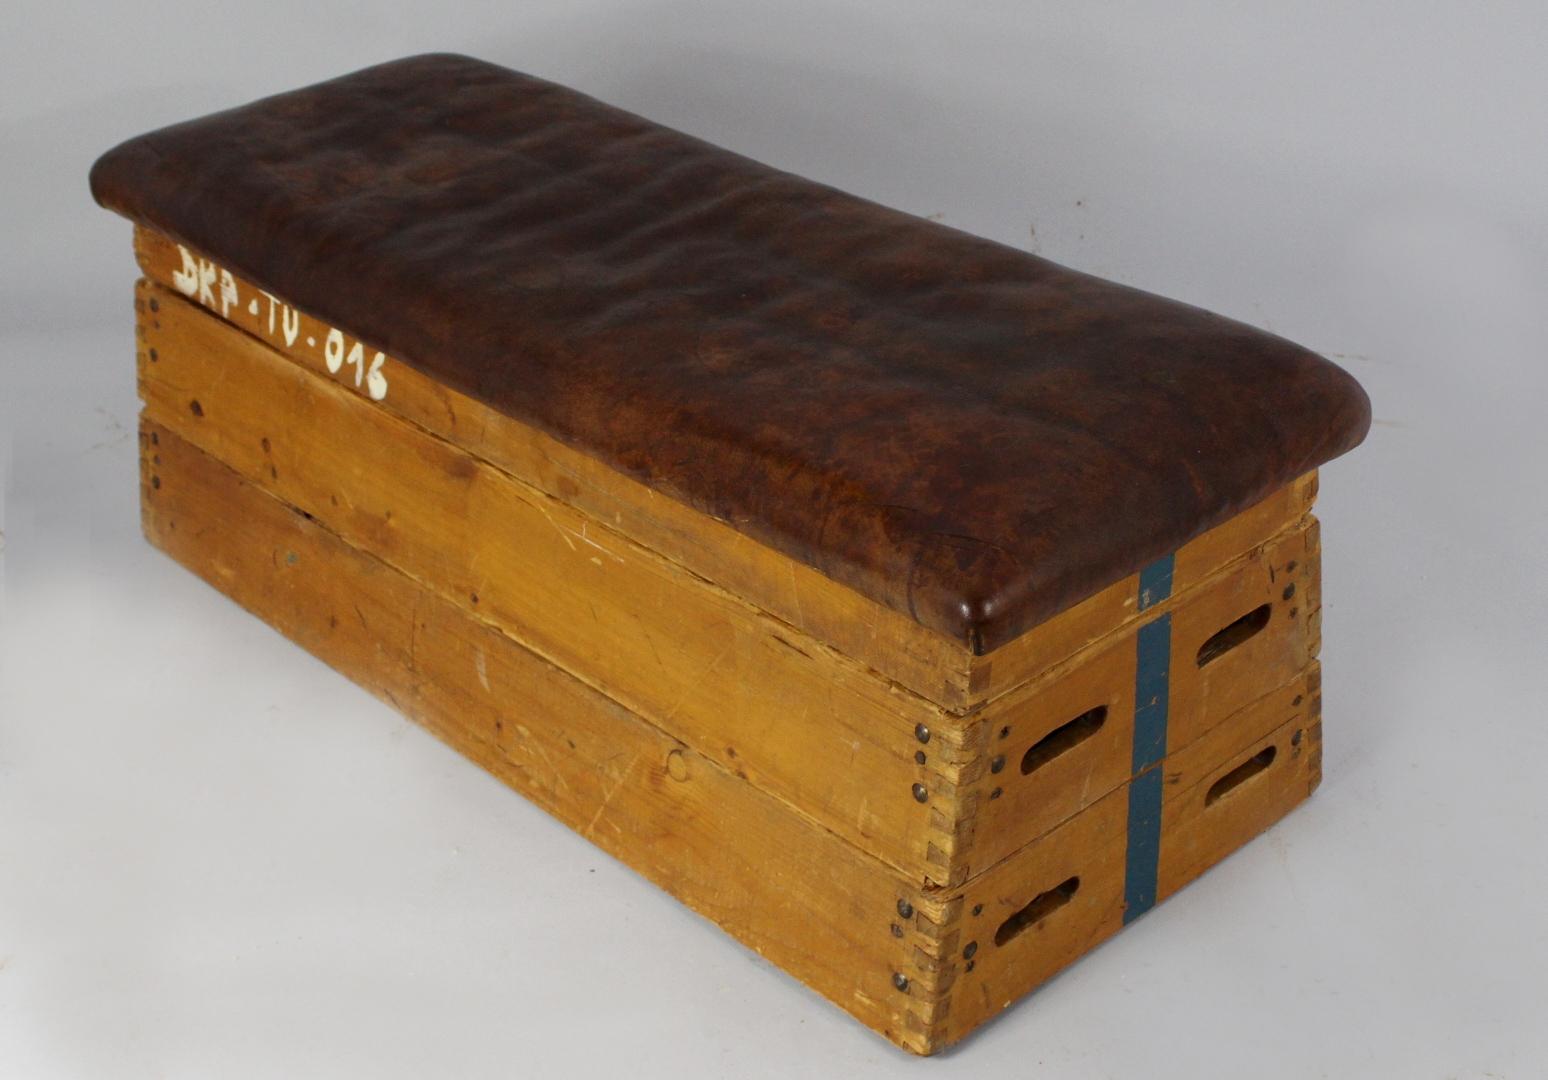 Gymnastic box or bench made in the 1950s. It is made from wood and leather. The box consists of a leather top and five wooden parts. Original condition with great patina.